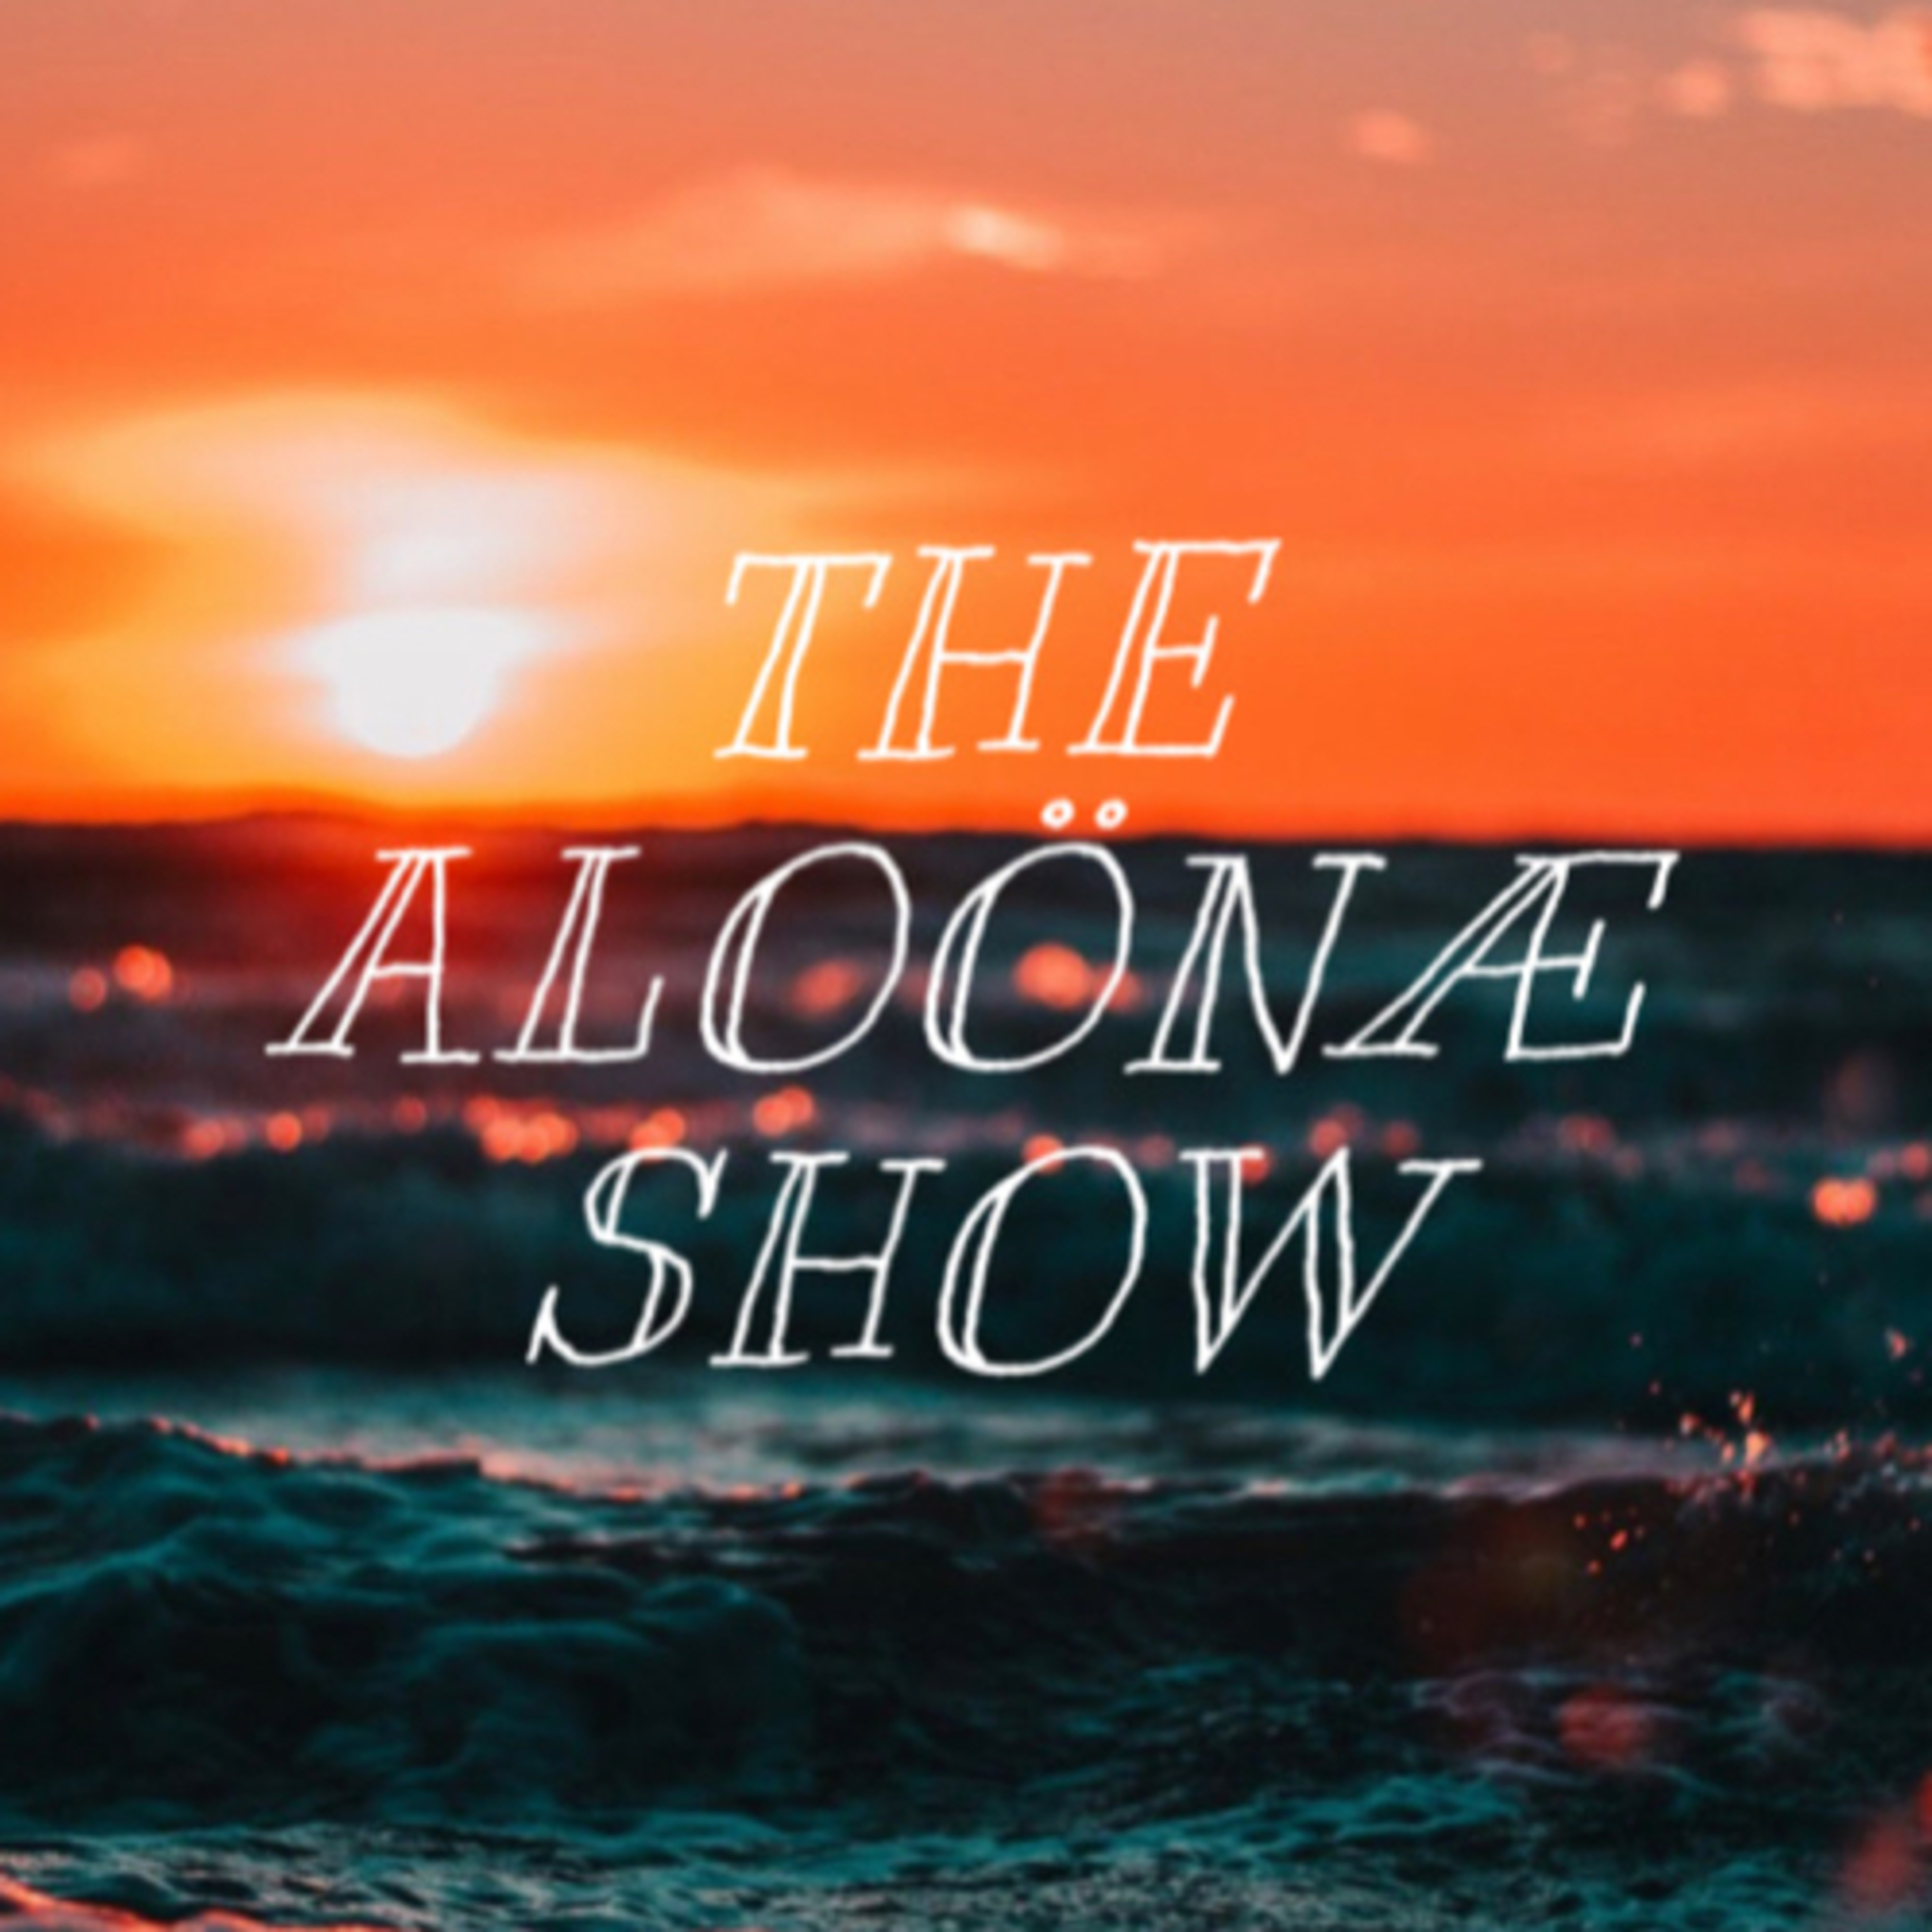 Fresh update on "wildlife" discussed on The Aloönæ Show